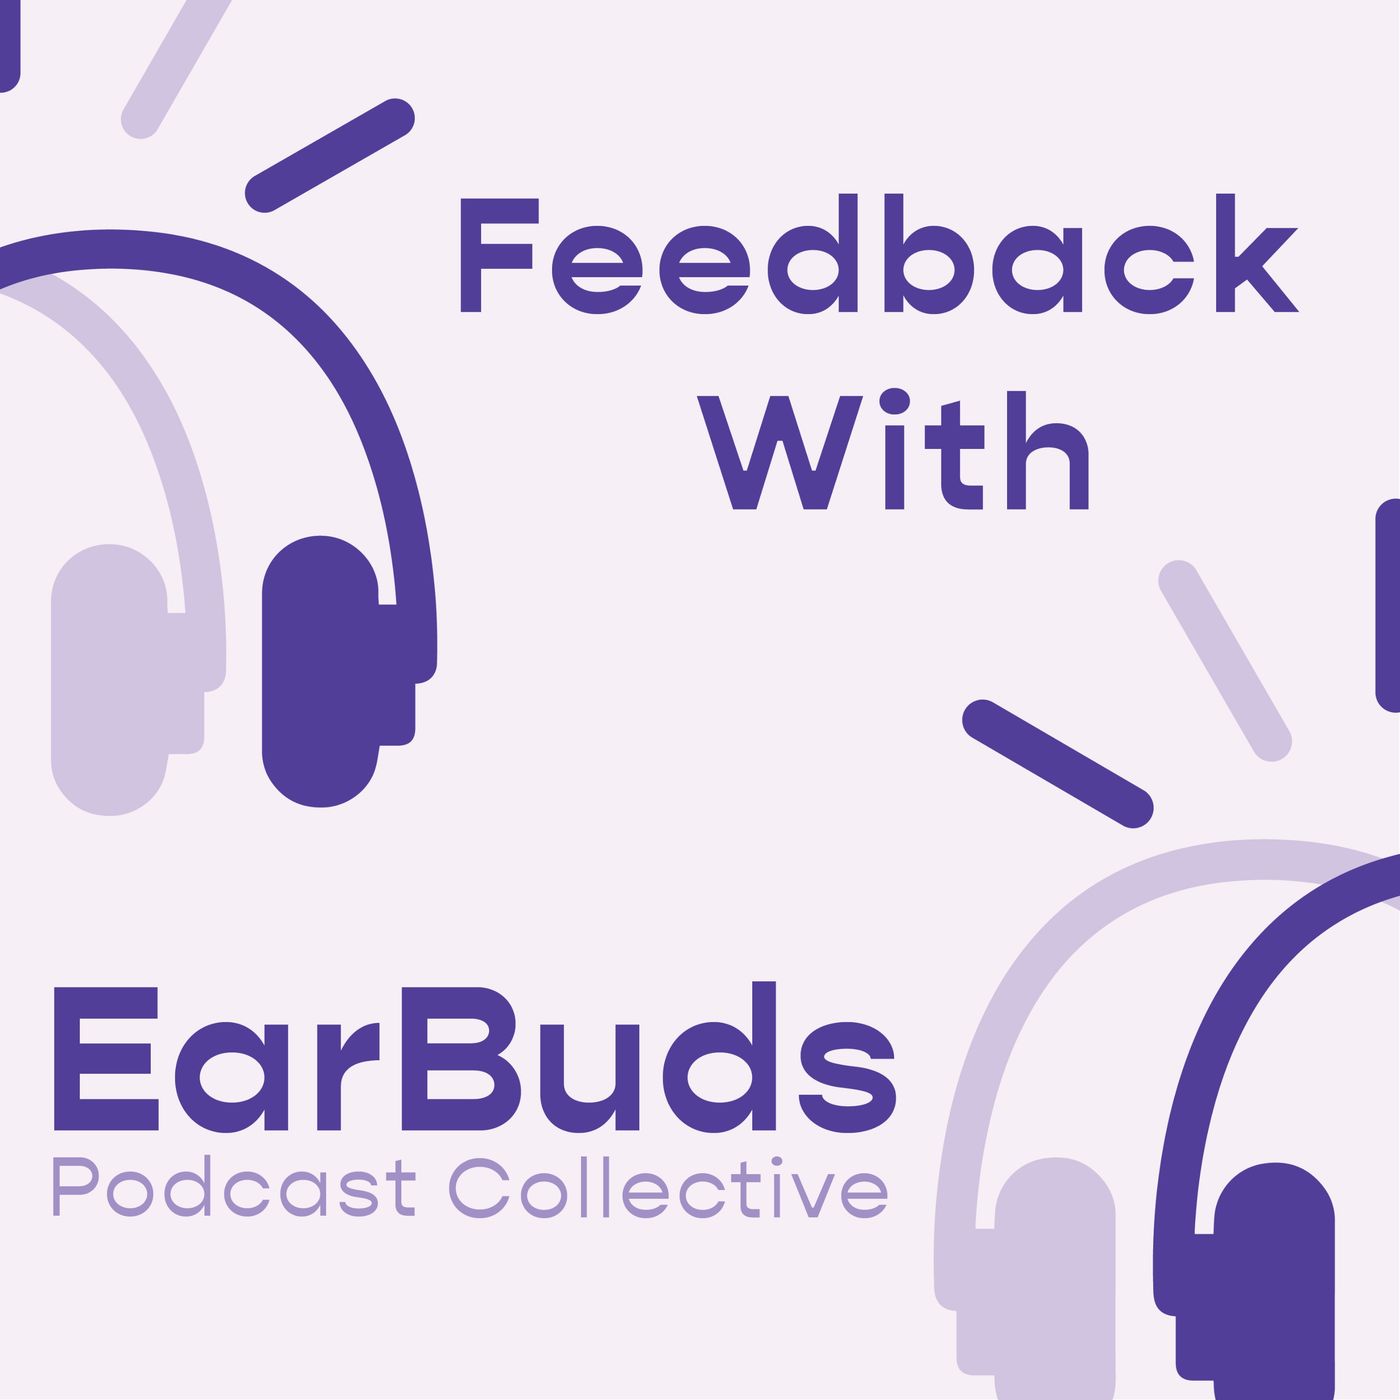 Feedback with EarBuds: The Podcast Recommendation Podcast podcast show image